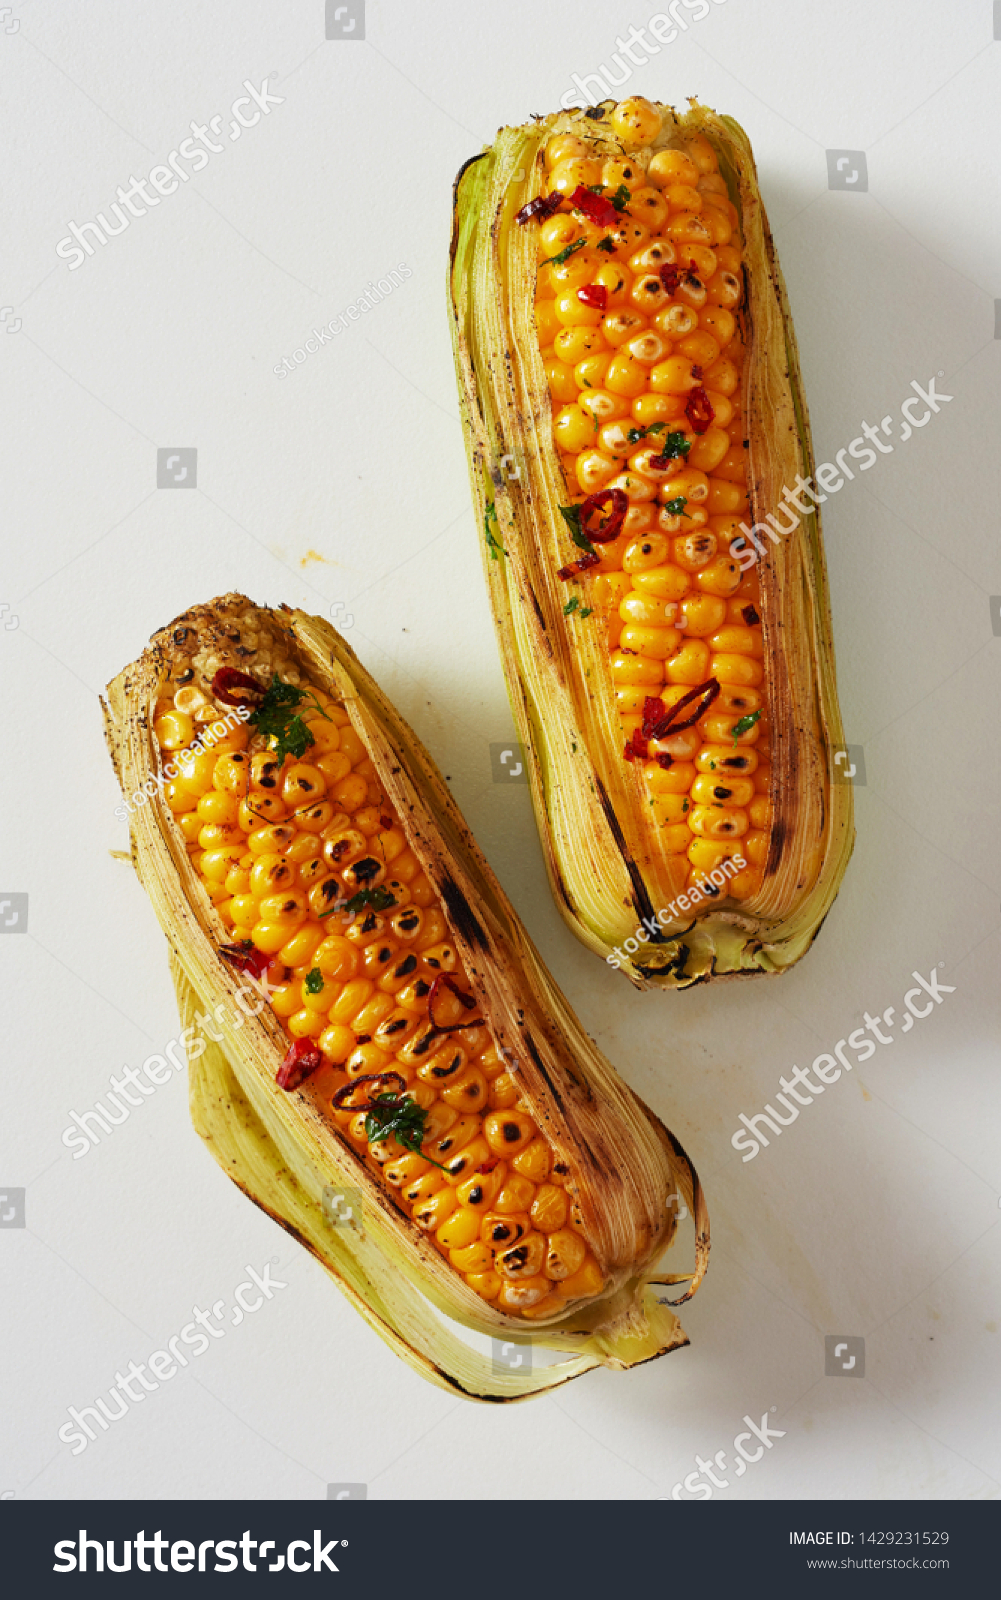 Spicy grilled corn on the cob seasoned with chili from a summer barbecue viewed from above on white in a healthy diet and seasonal cuisine concept #1429231529